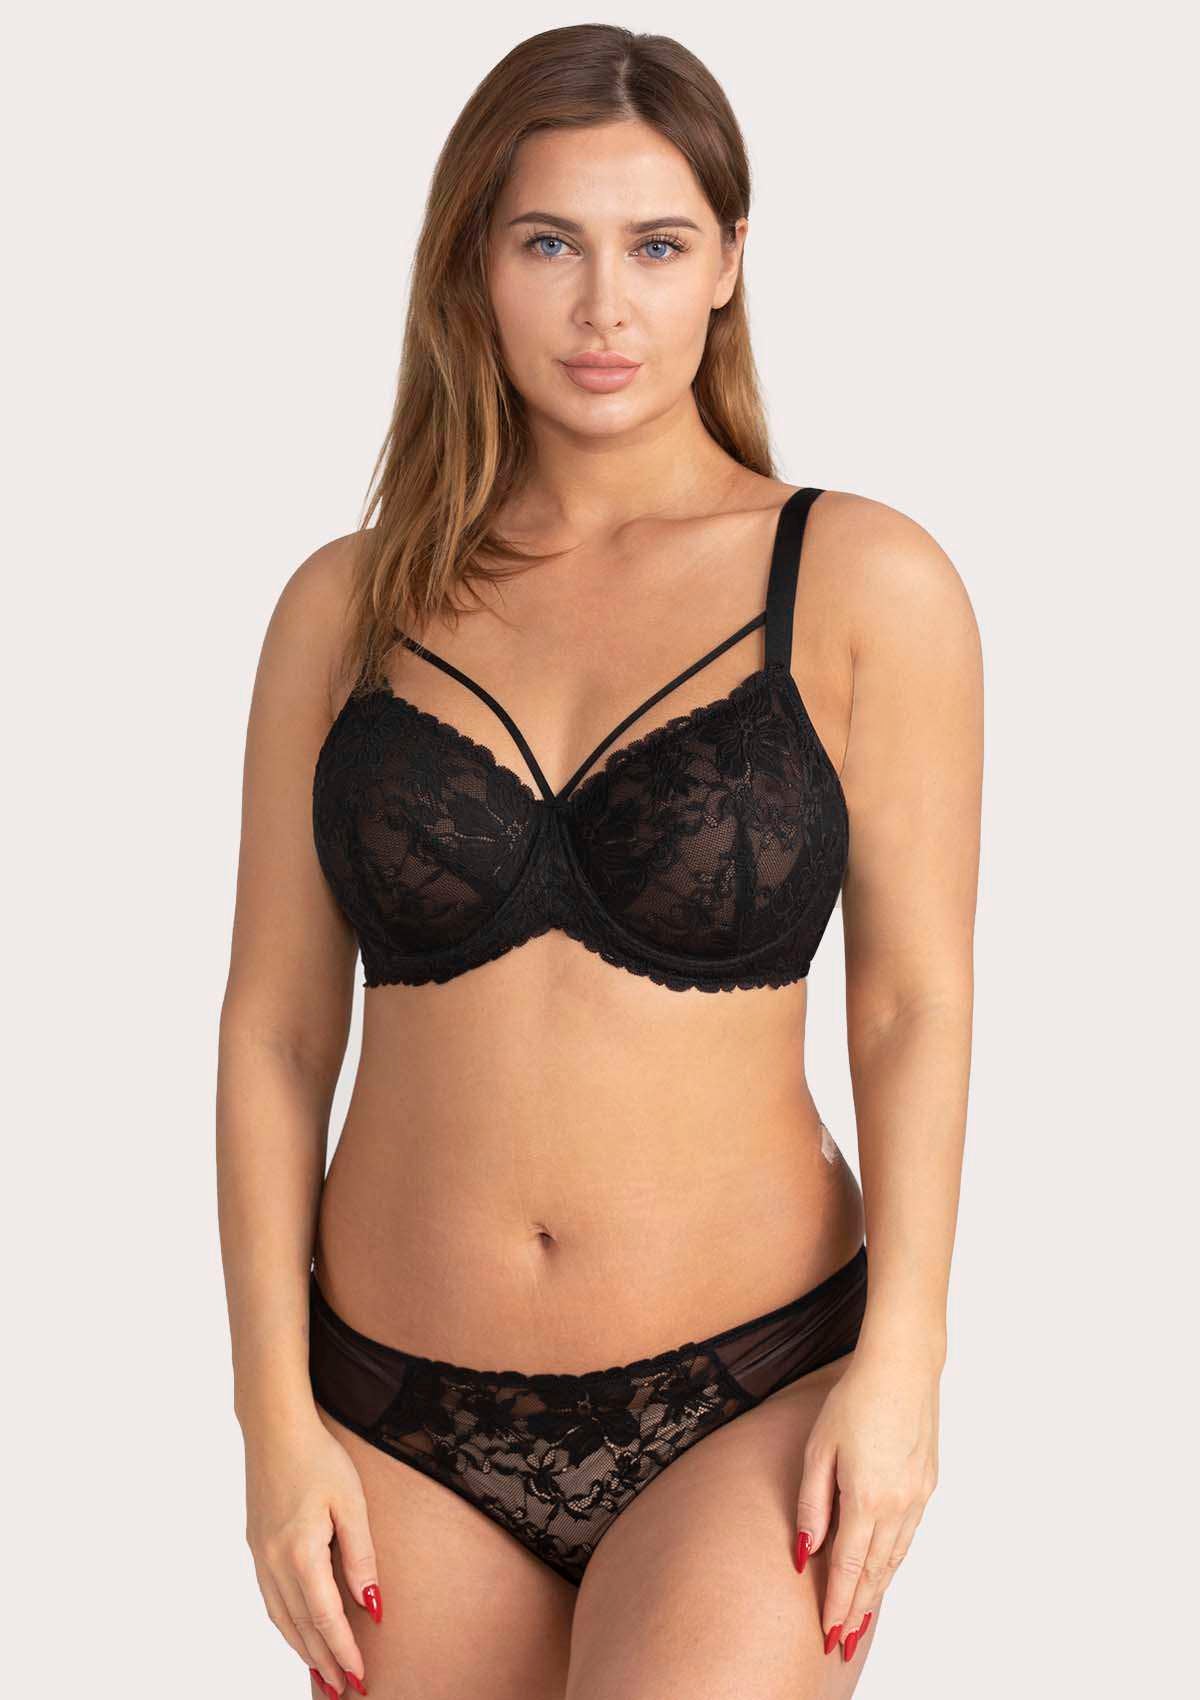 HSIA Pretty In Petals Lace Bra And Panty Set: Non Padded Wired Bra - Black / 44 / I